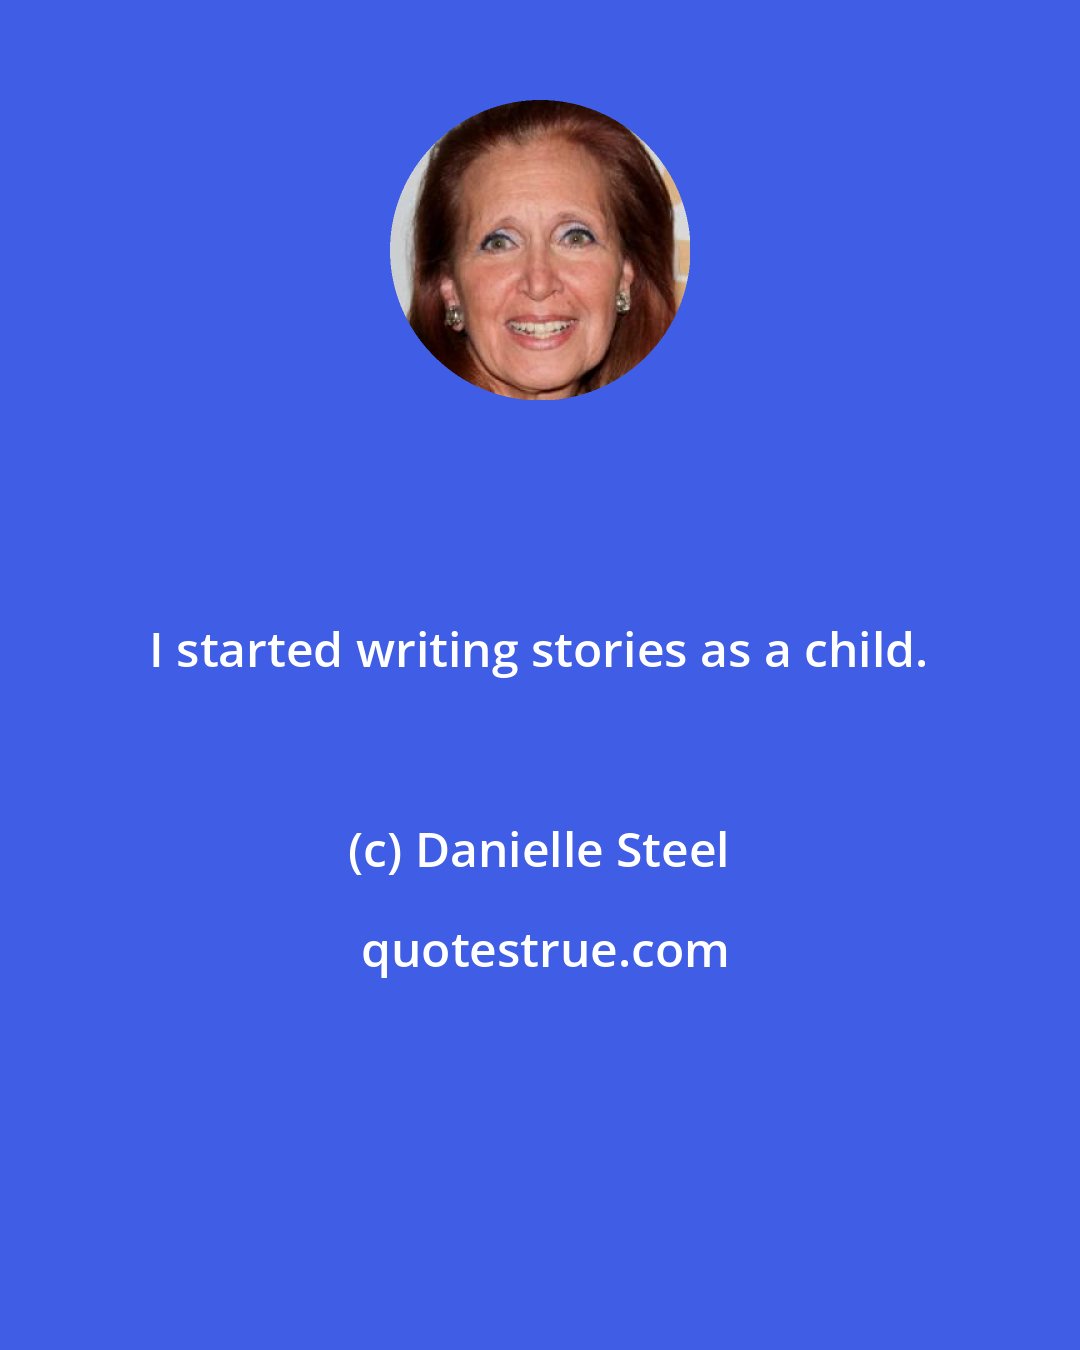 Danielle Steel: I started writing stories as a child.